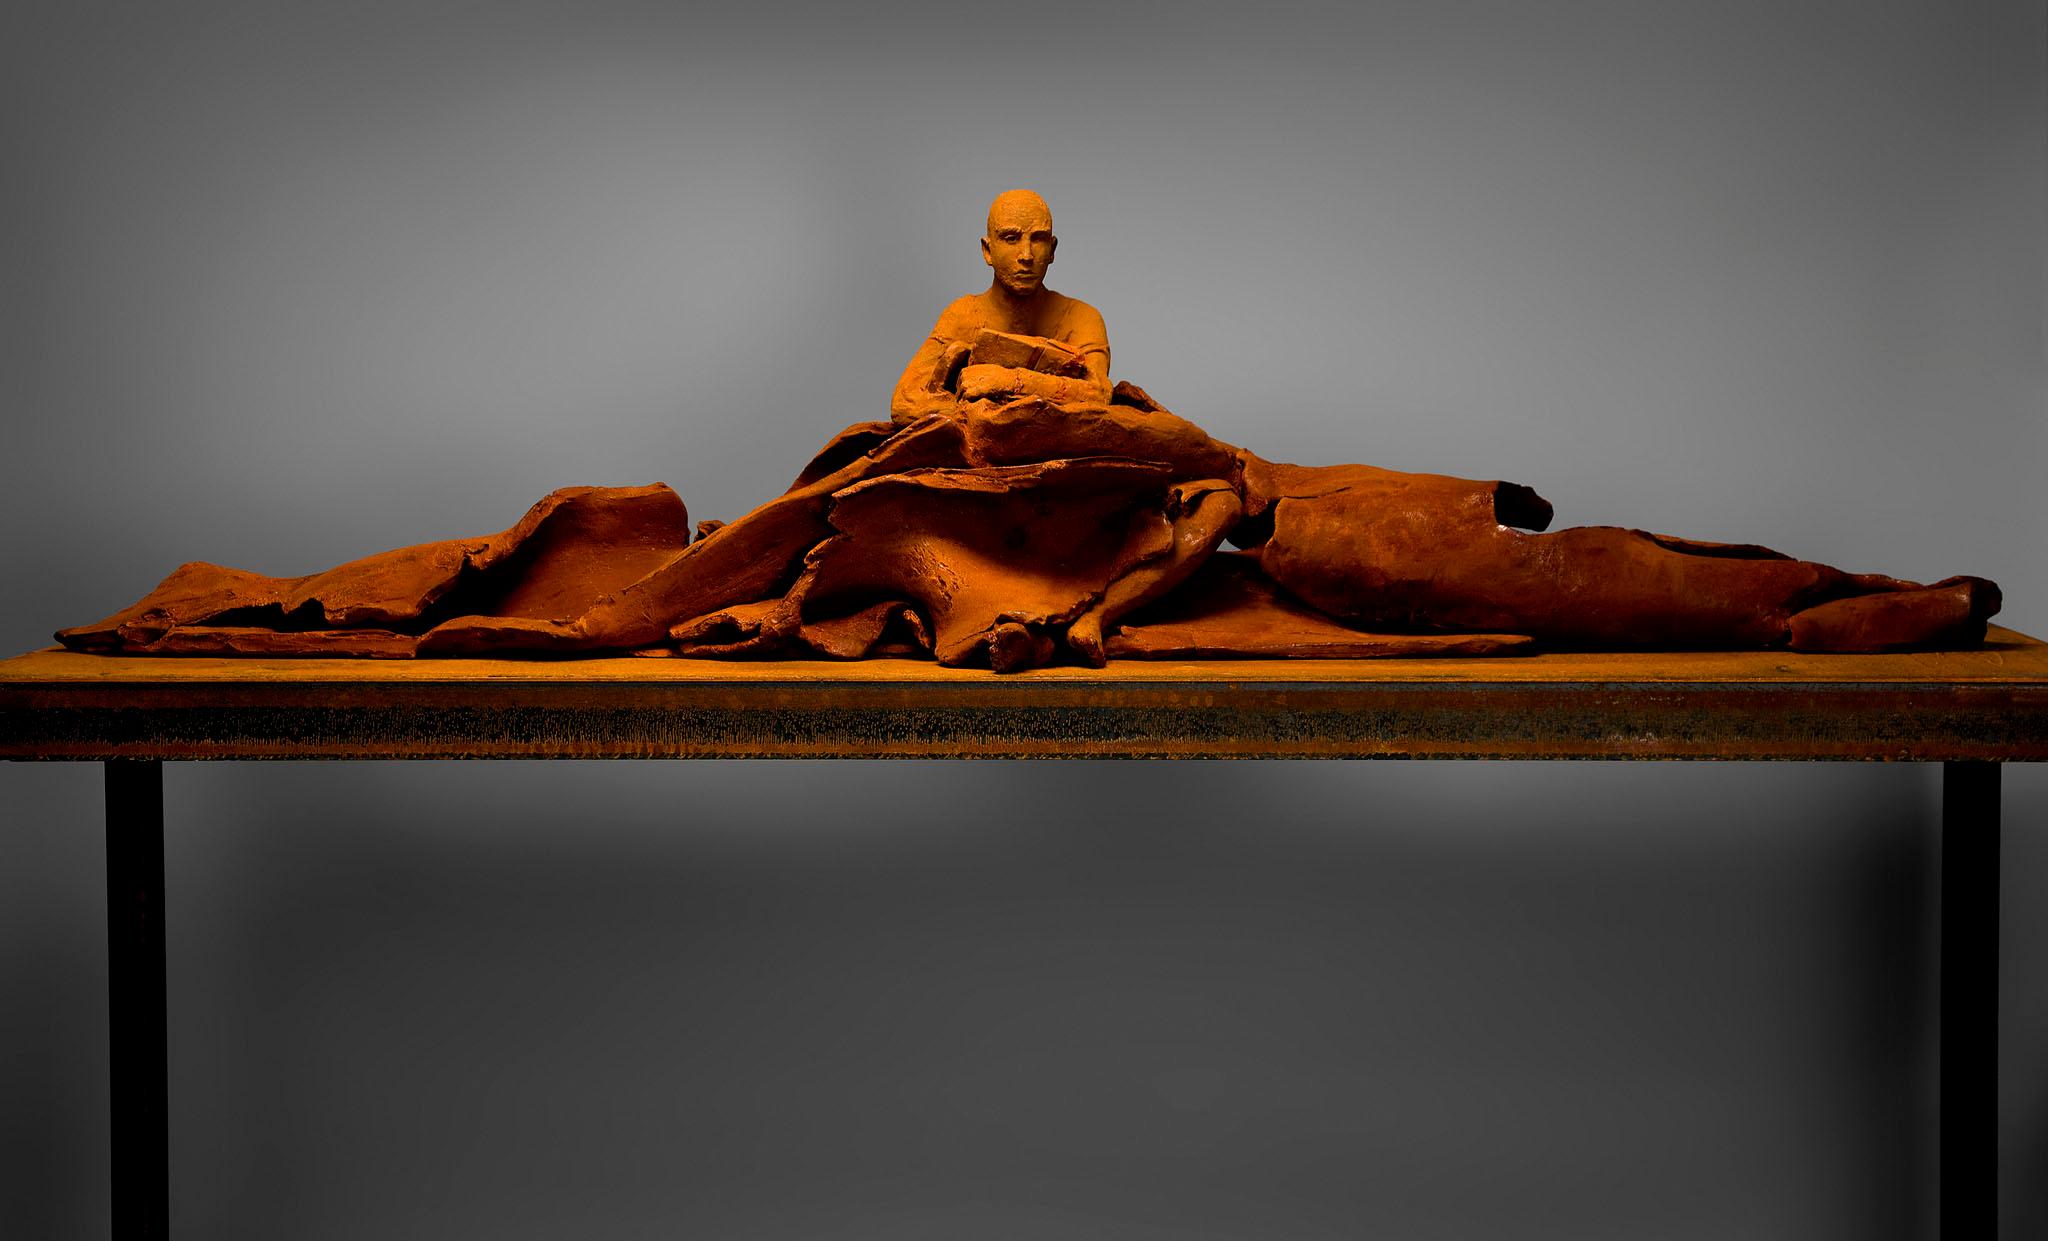 Abundance and Chaos by Hanneke Beaumont

Beaumont's sculptures are realized in terracotta, bronze and cast iron, and she is known for sculpting figural life-sized human forms. Her gender neutral subjects are impressively passé in posture, and are